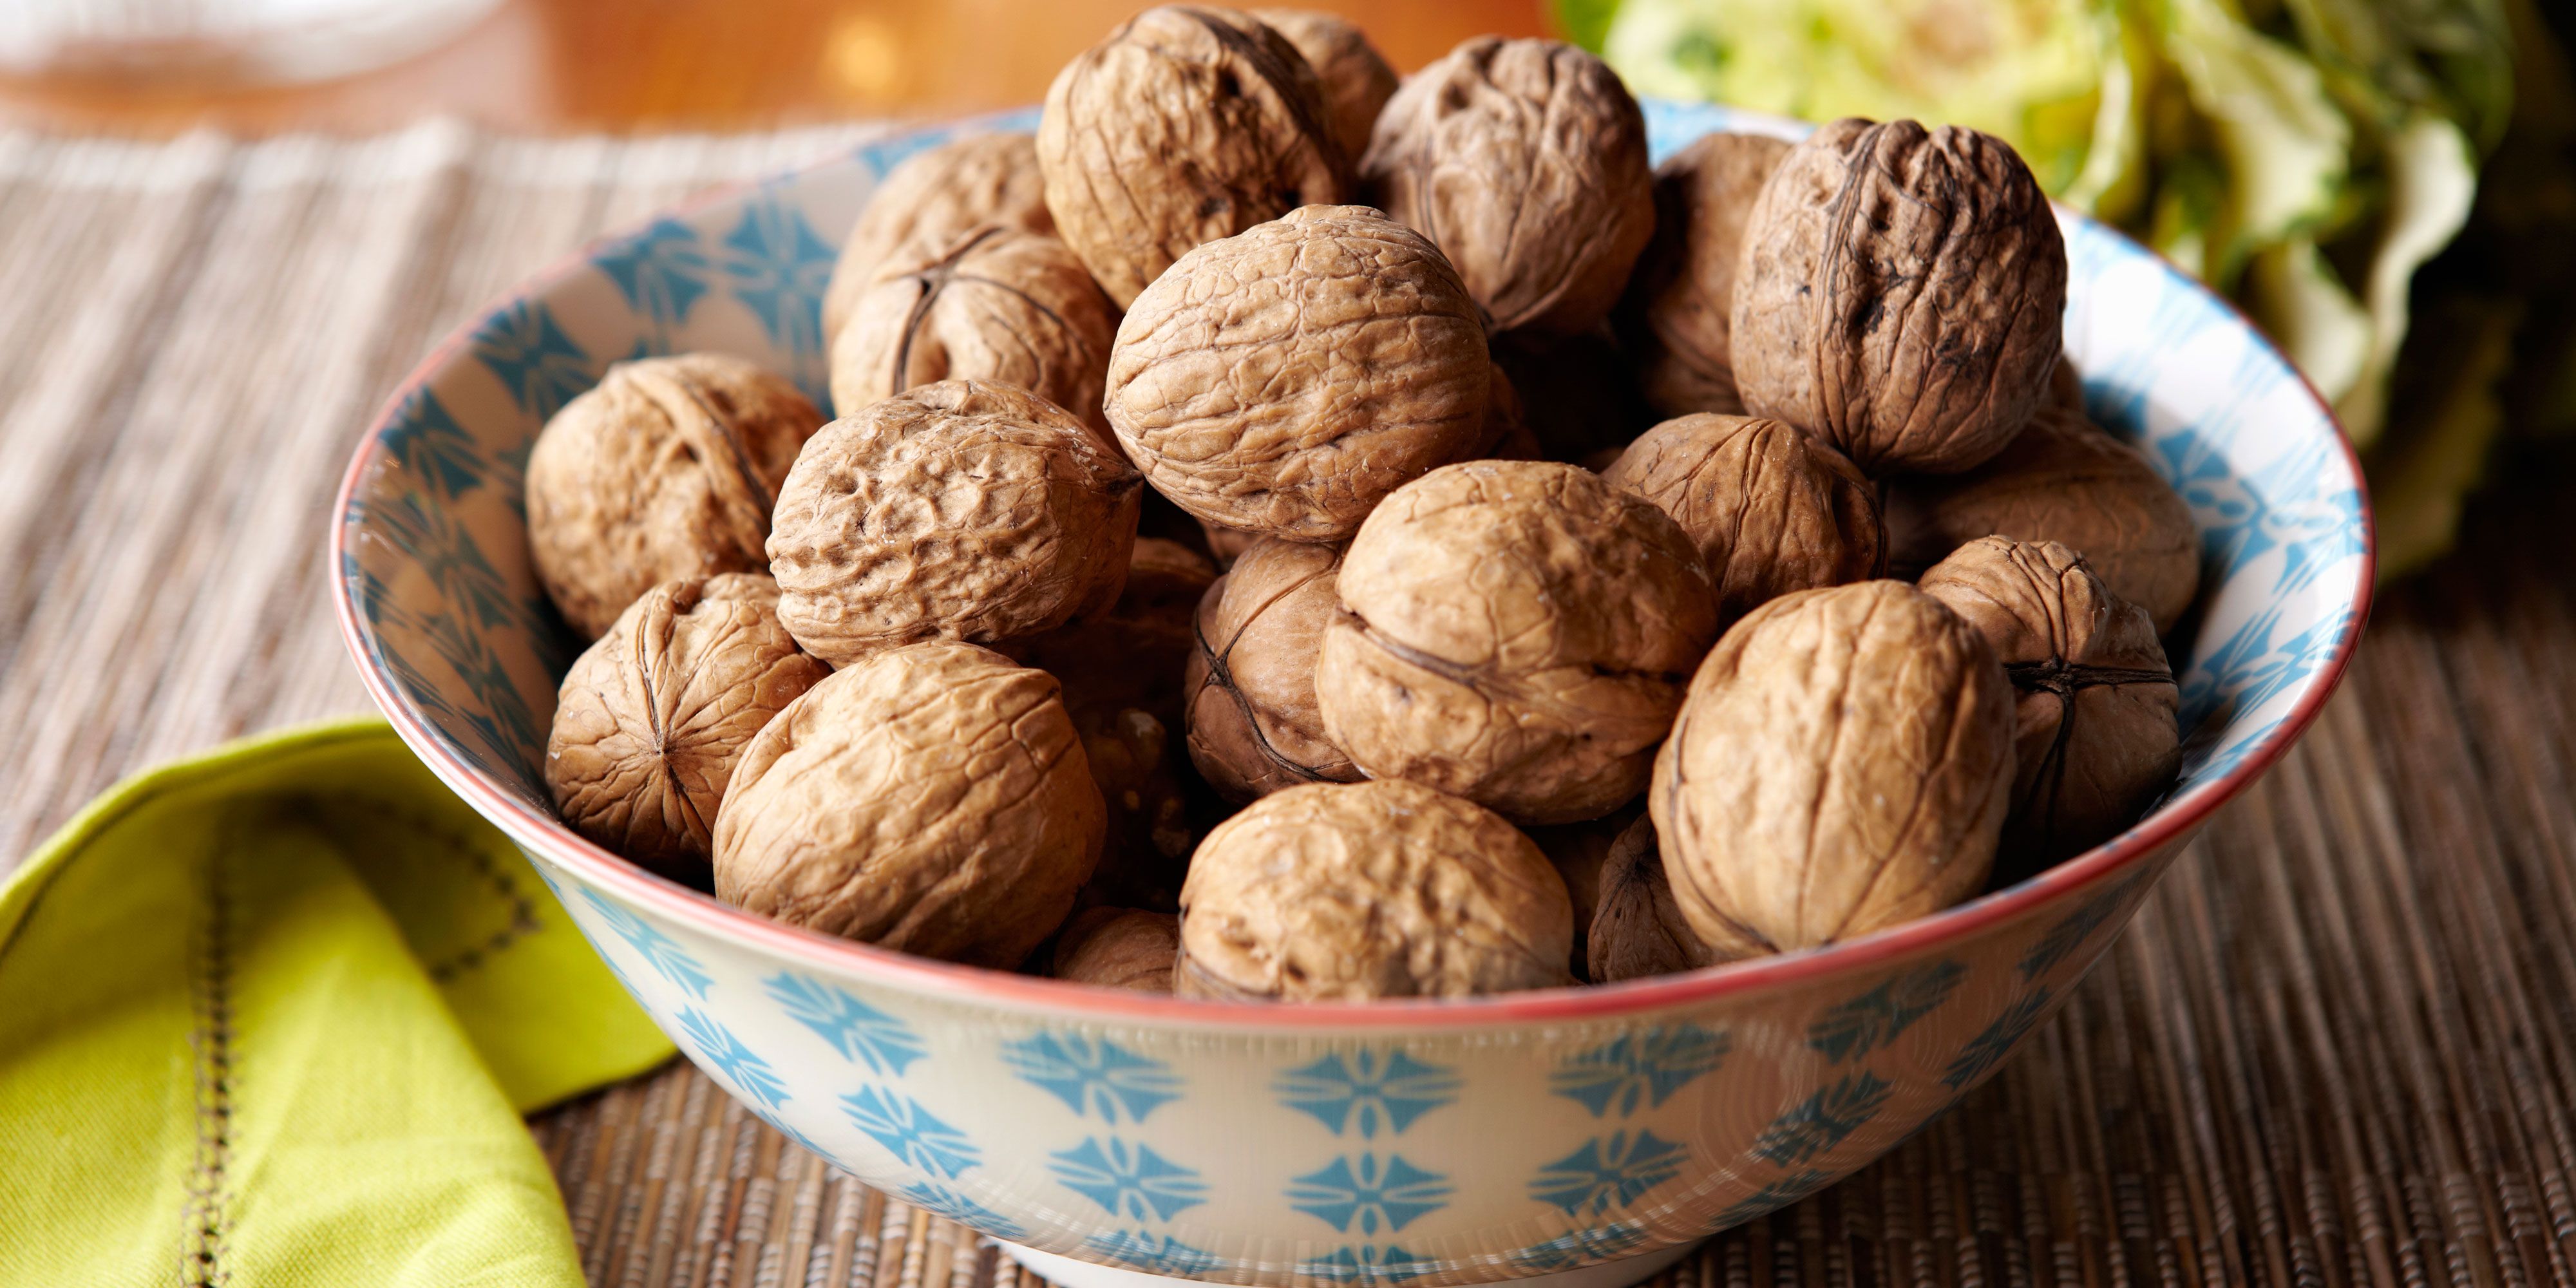 Walnuts Porn - How to stop cravings